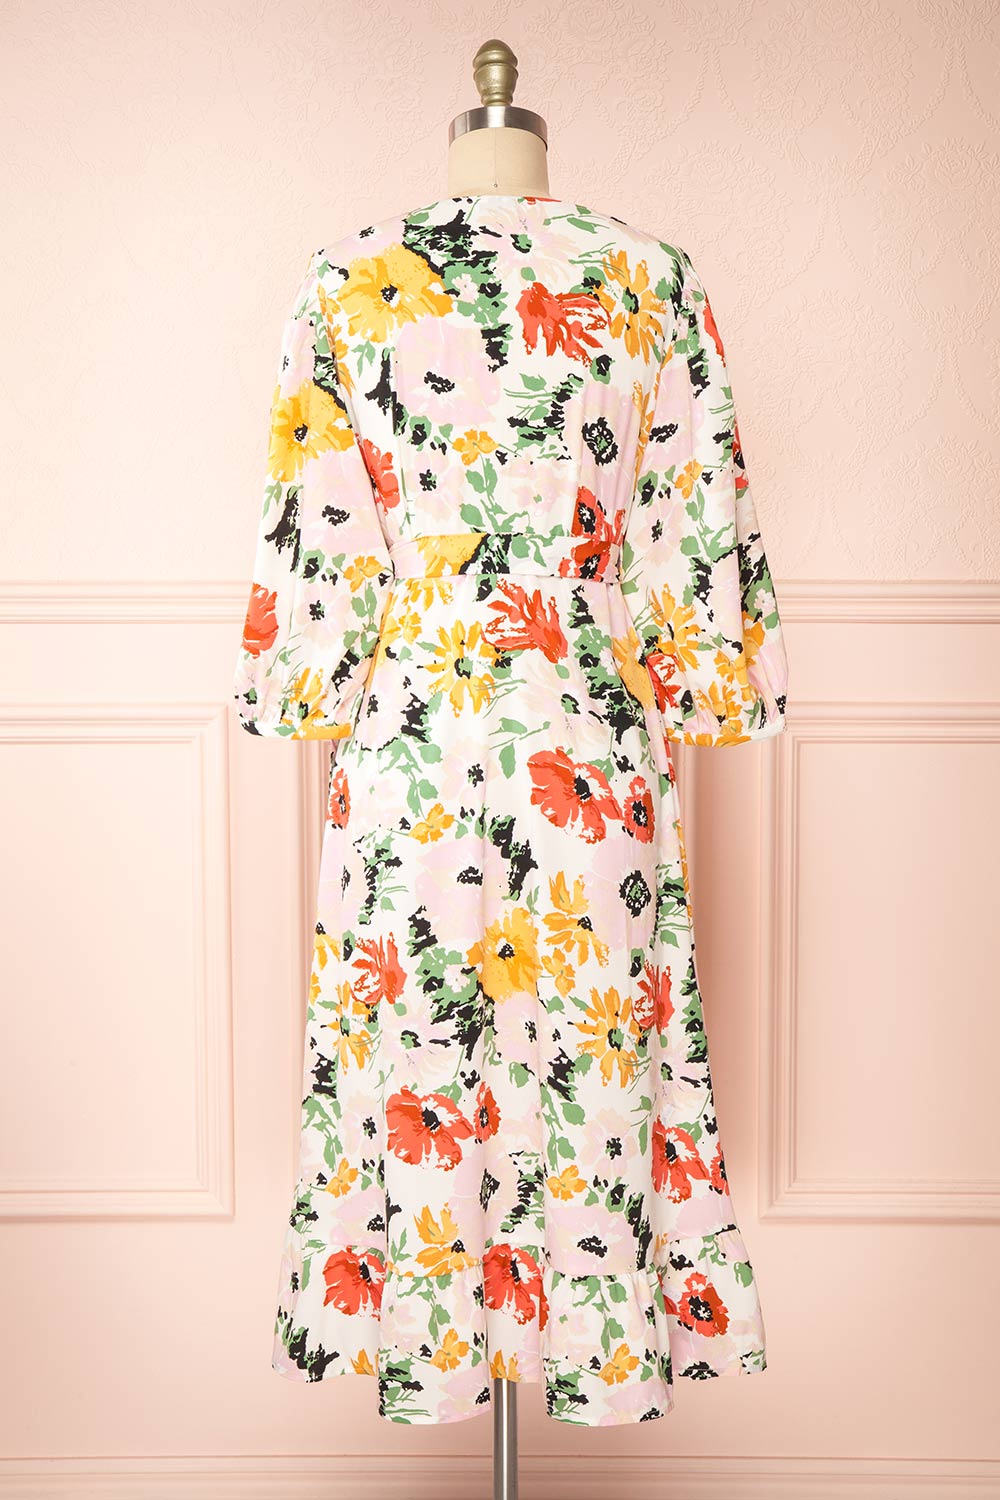 Bianma Colorful Floral Wrap Dress w/ Long Sleeves | Boutique 1861 back view